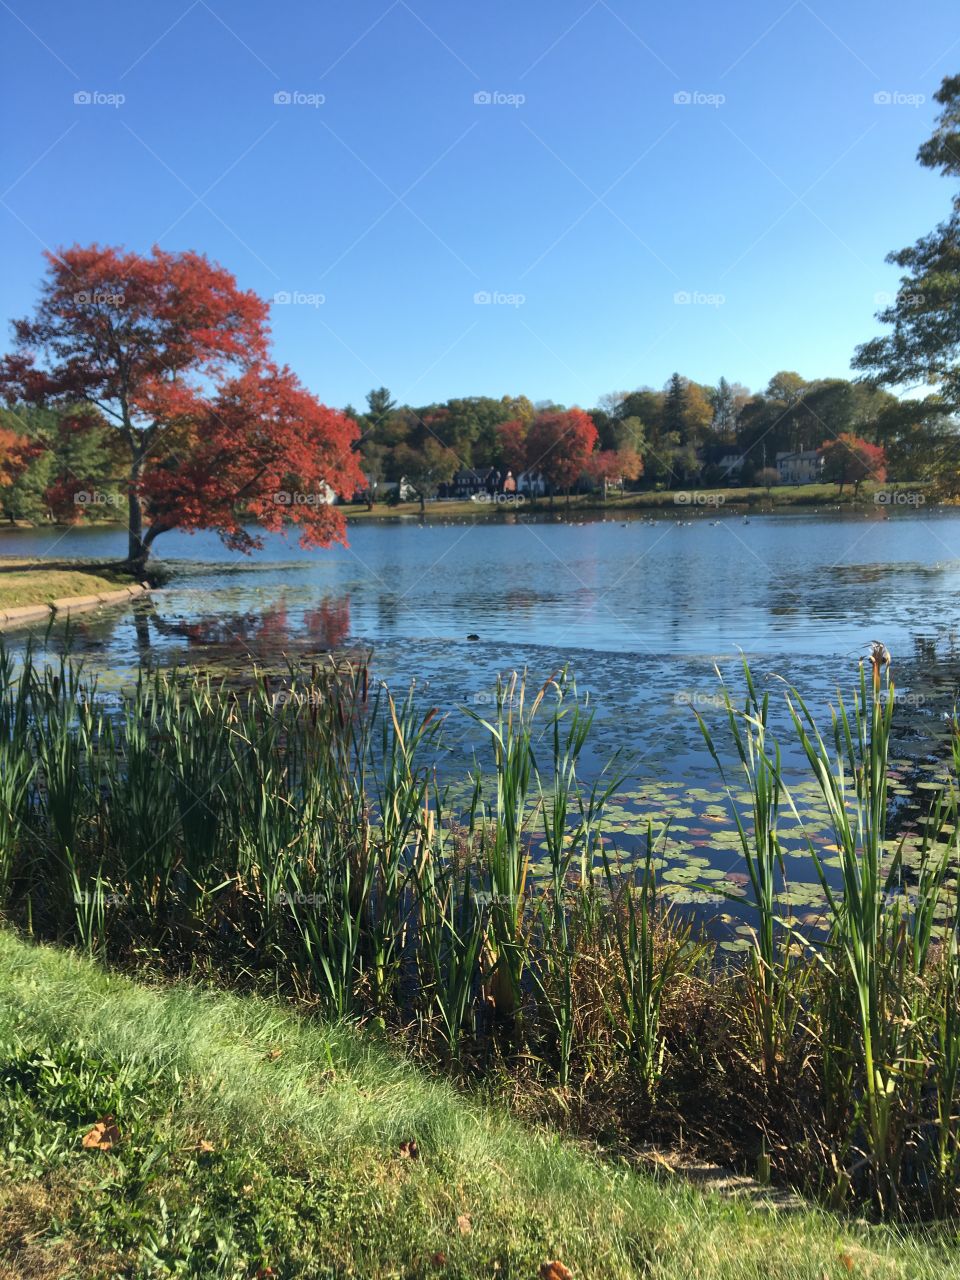 Pretty fall day on a small pond. Red leaves on a tree overlook the crisp, blue pond. Foreground features bright green pond flora. Picturesque snapshot of a fall afternoon in New England